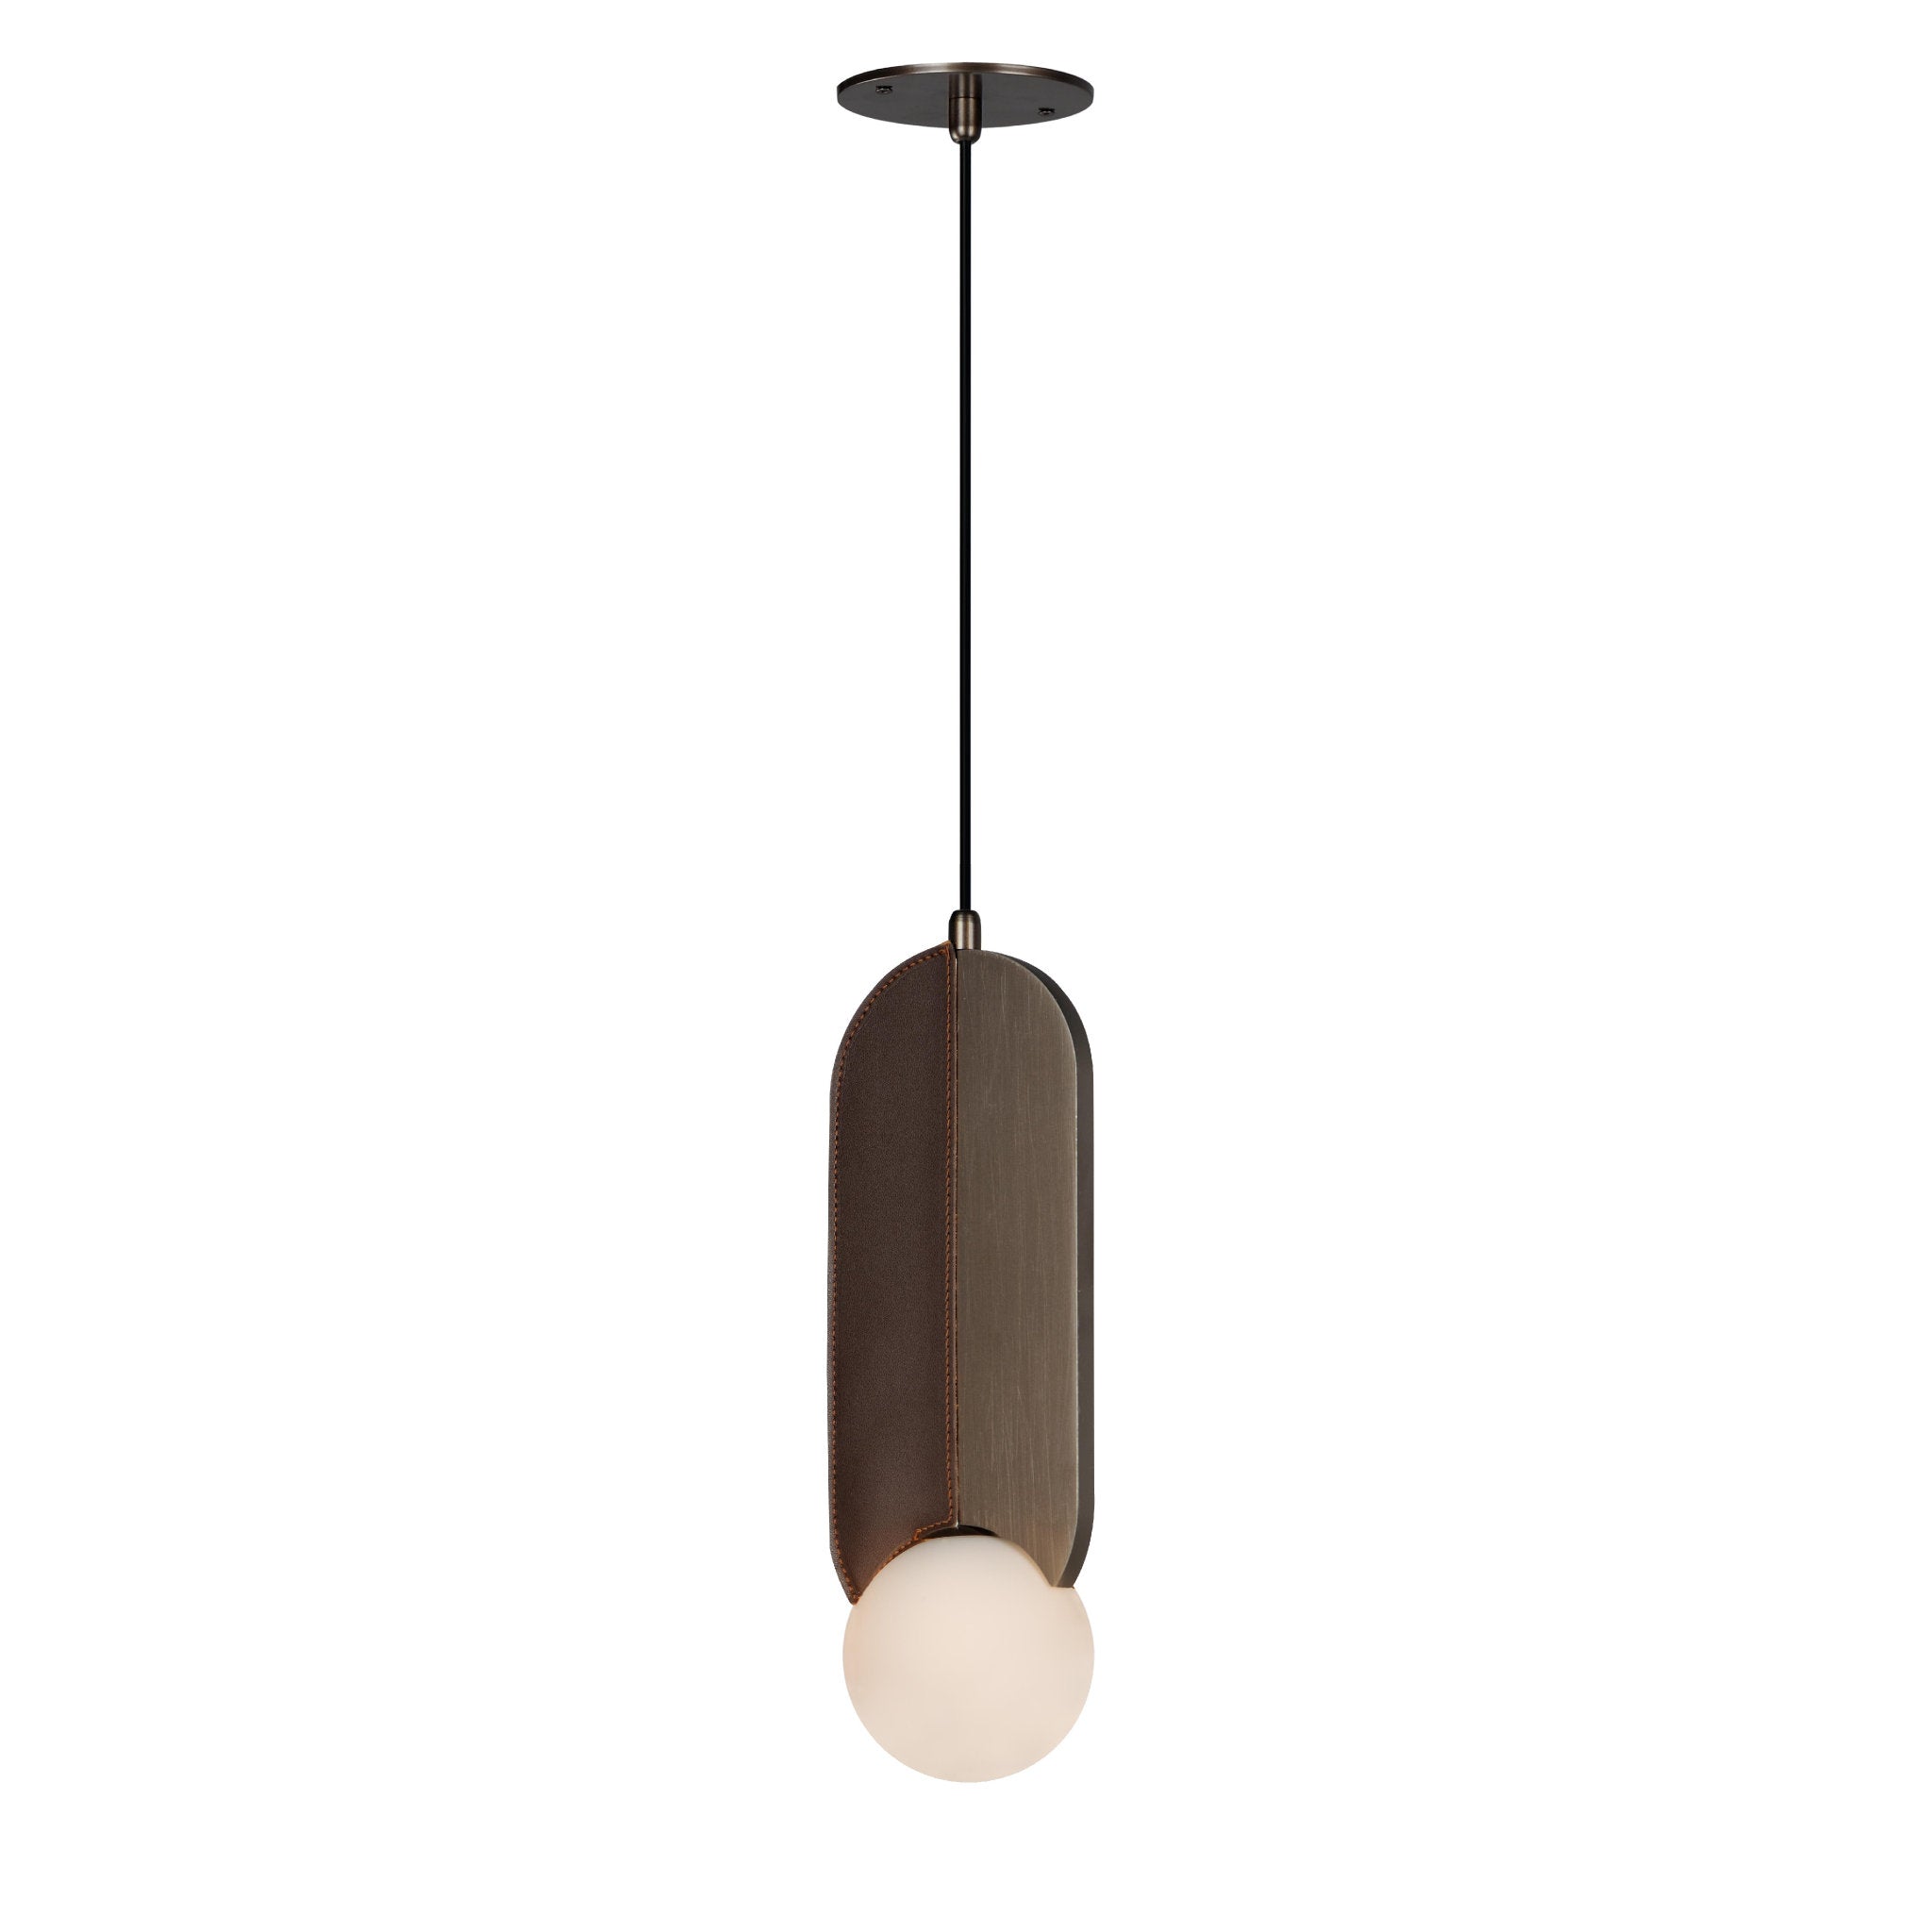 Studio M SM24603BBZ Stitched Down-Light Pendant in Brushed Bronze by Nina Magon